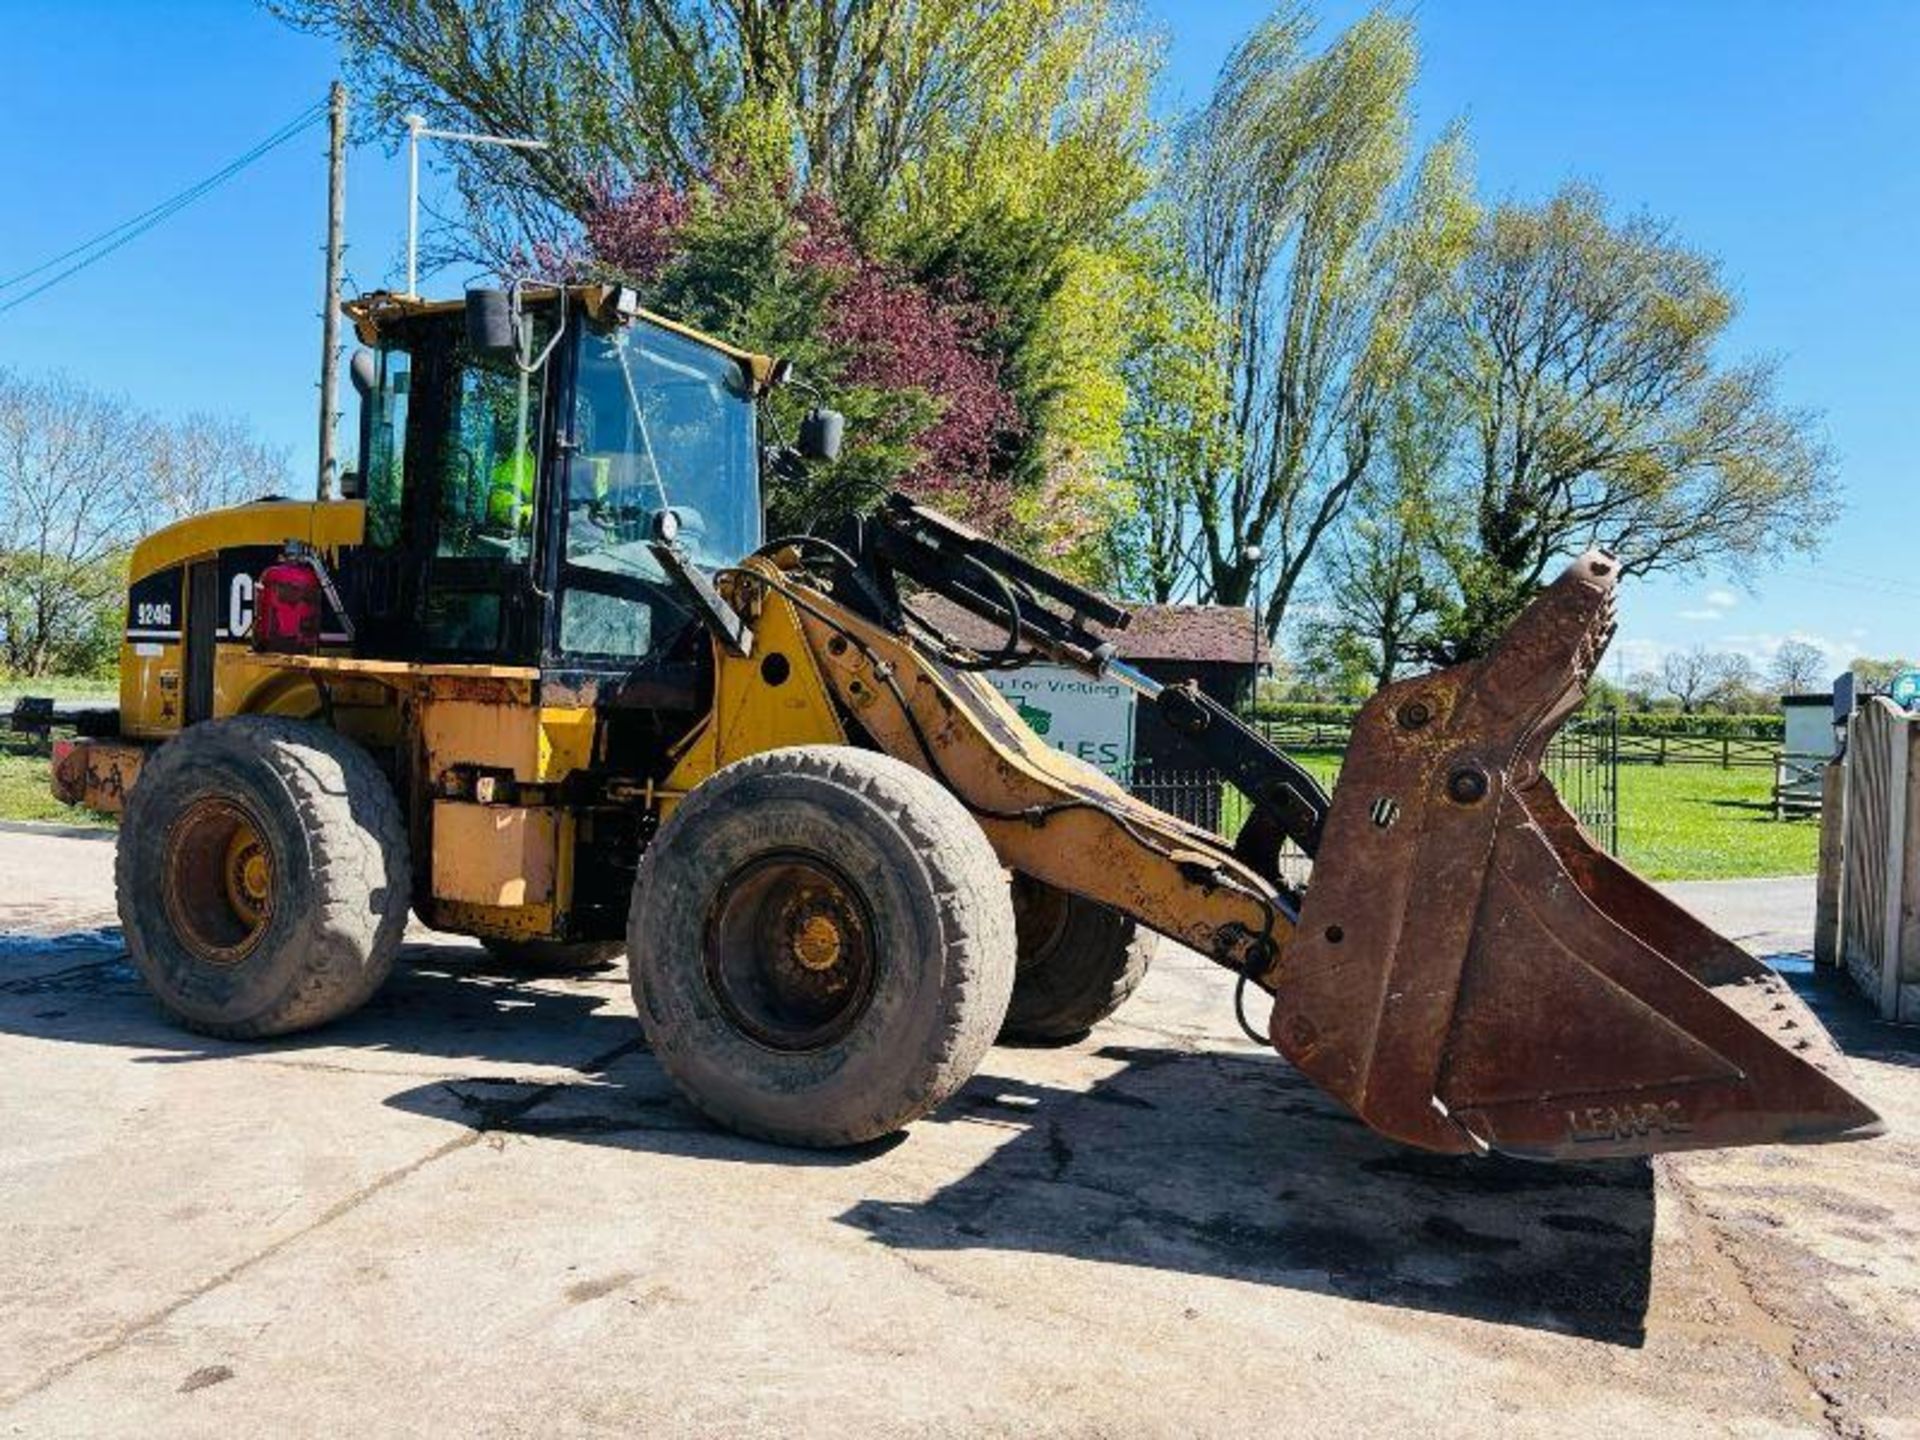 CATERPILLAR 924G 4WD LOADING SHOVEL C/W FOUR IN ONE BUCKET  - Image 18 of 18